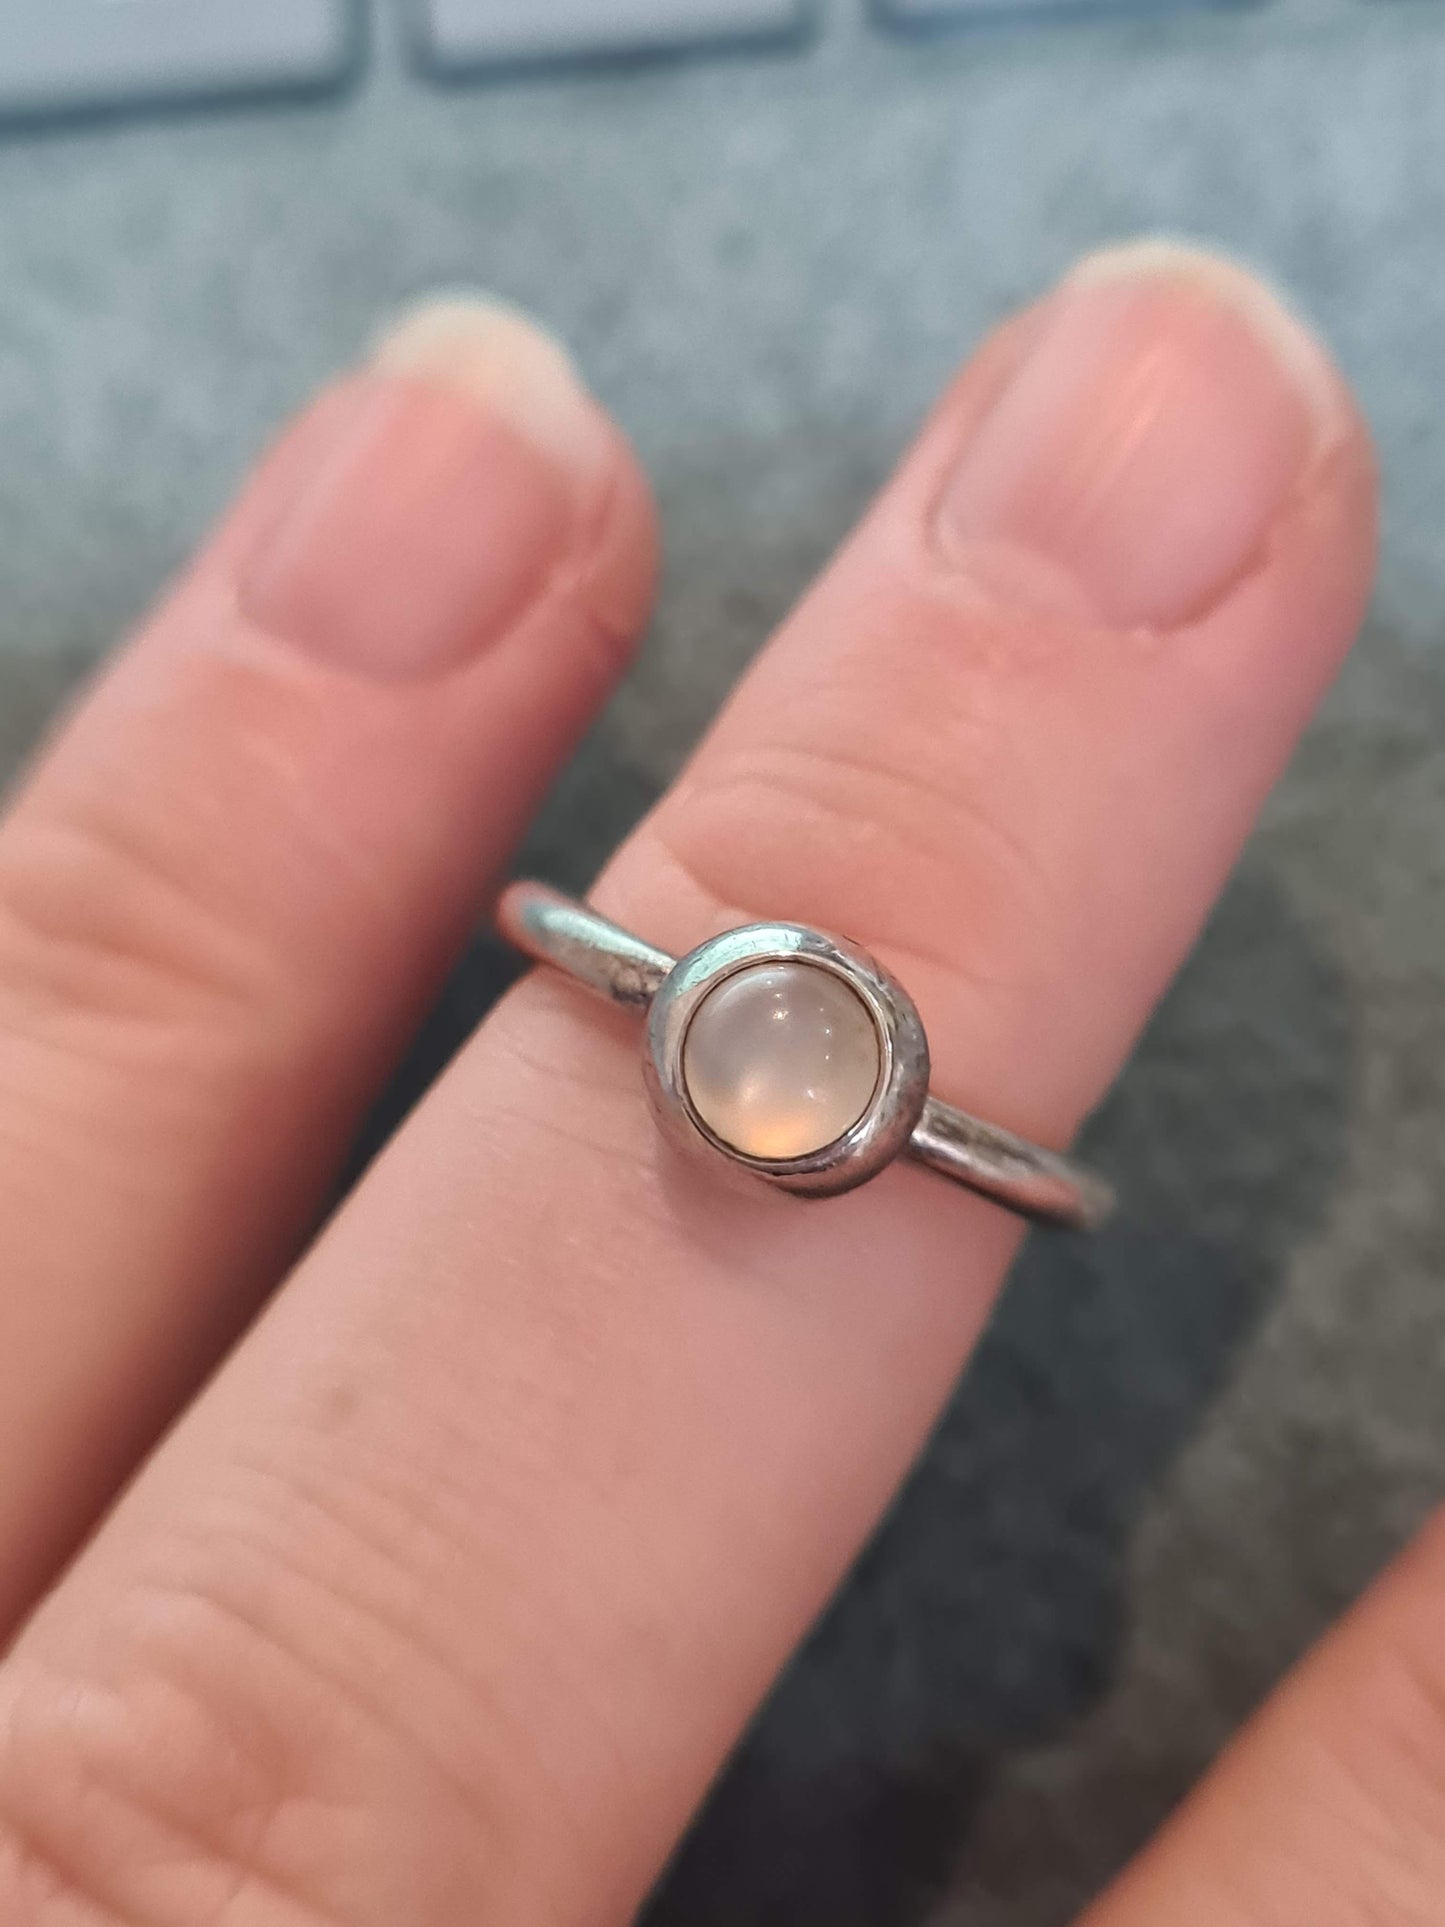 Genuine Pandora Clear Cabochon Ring in Size 54